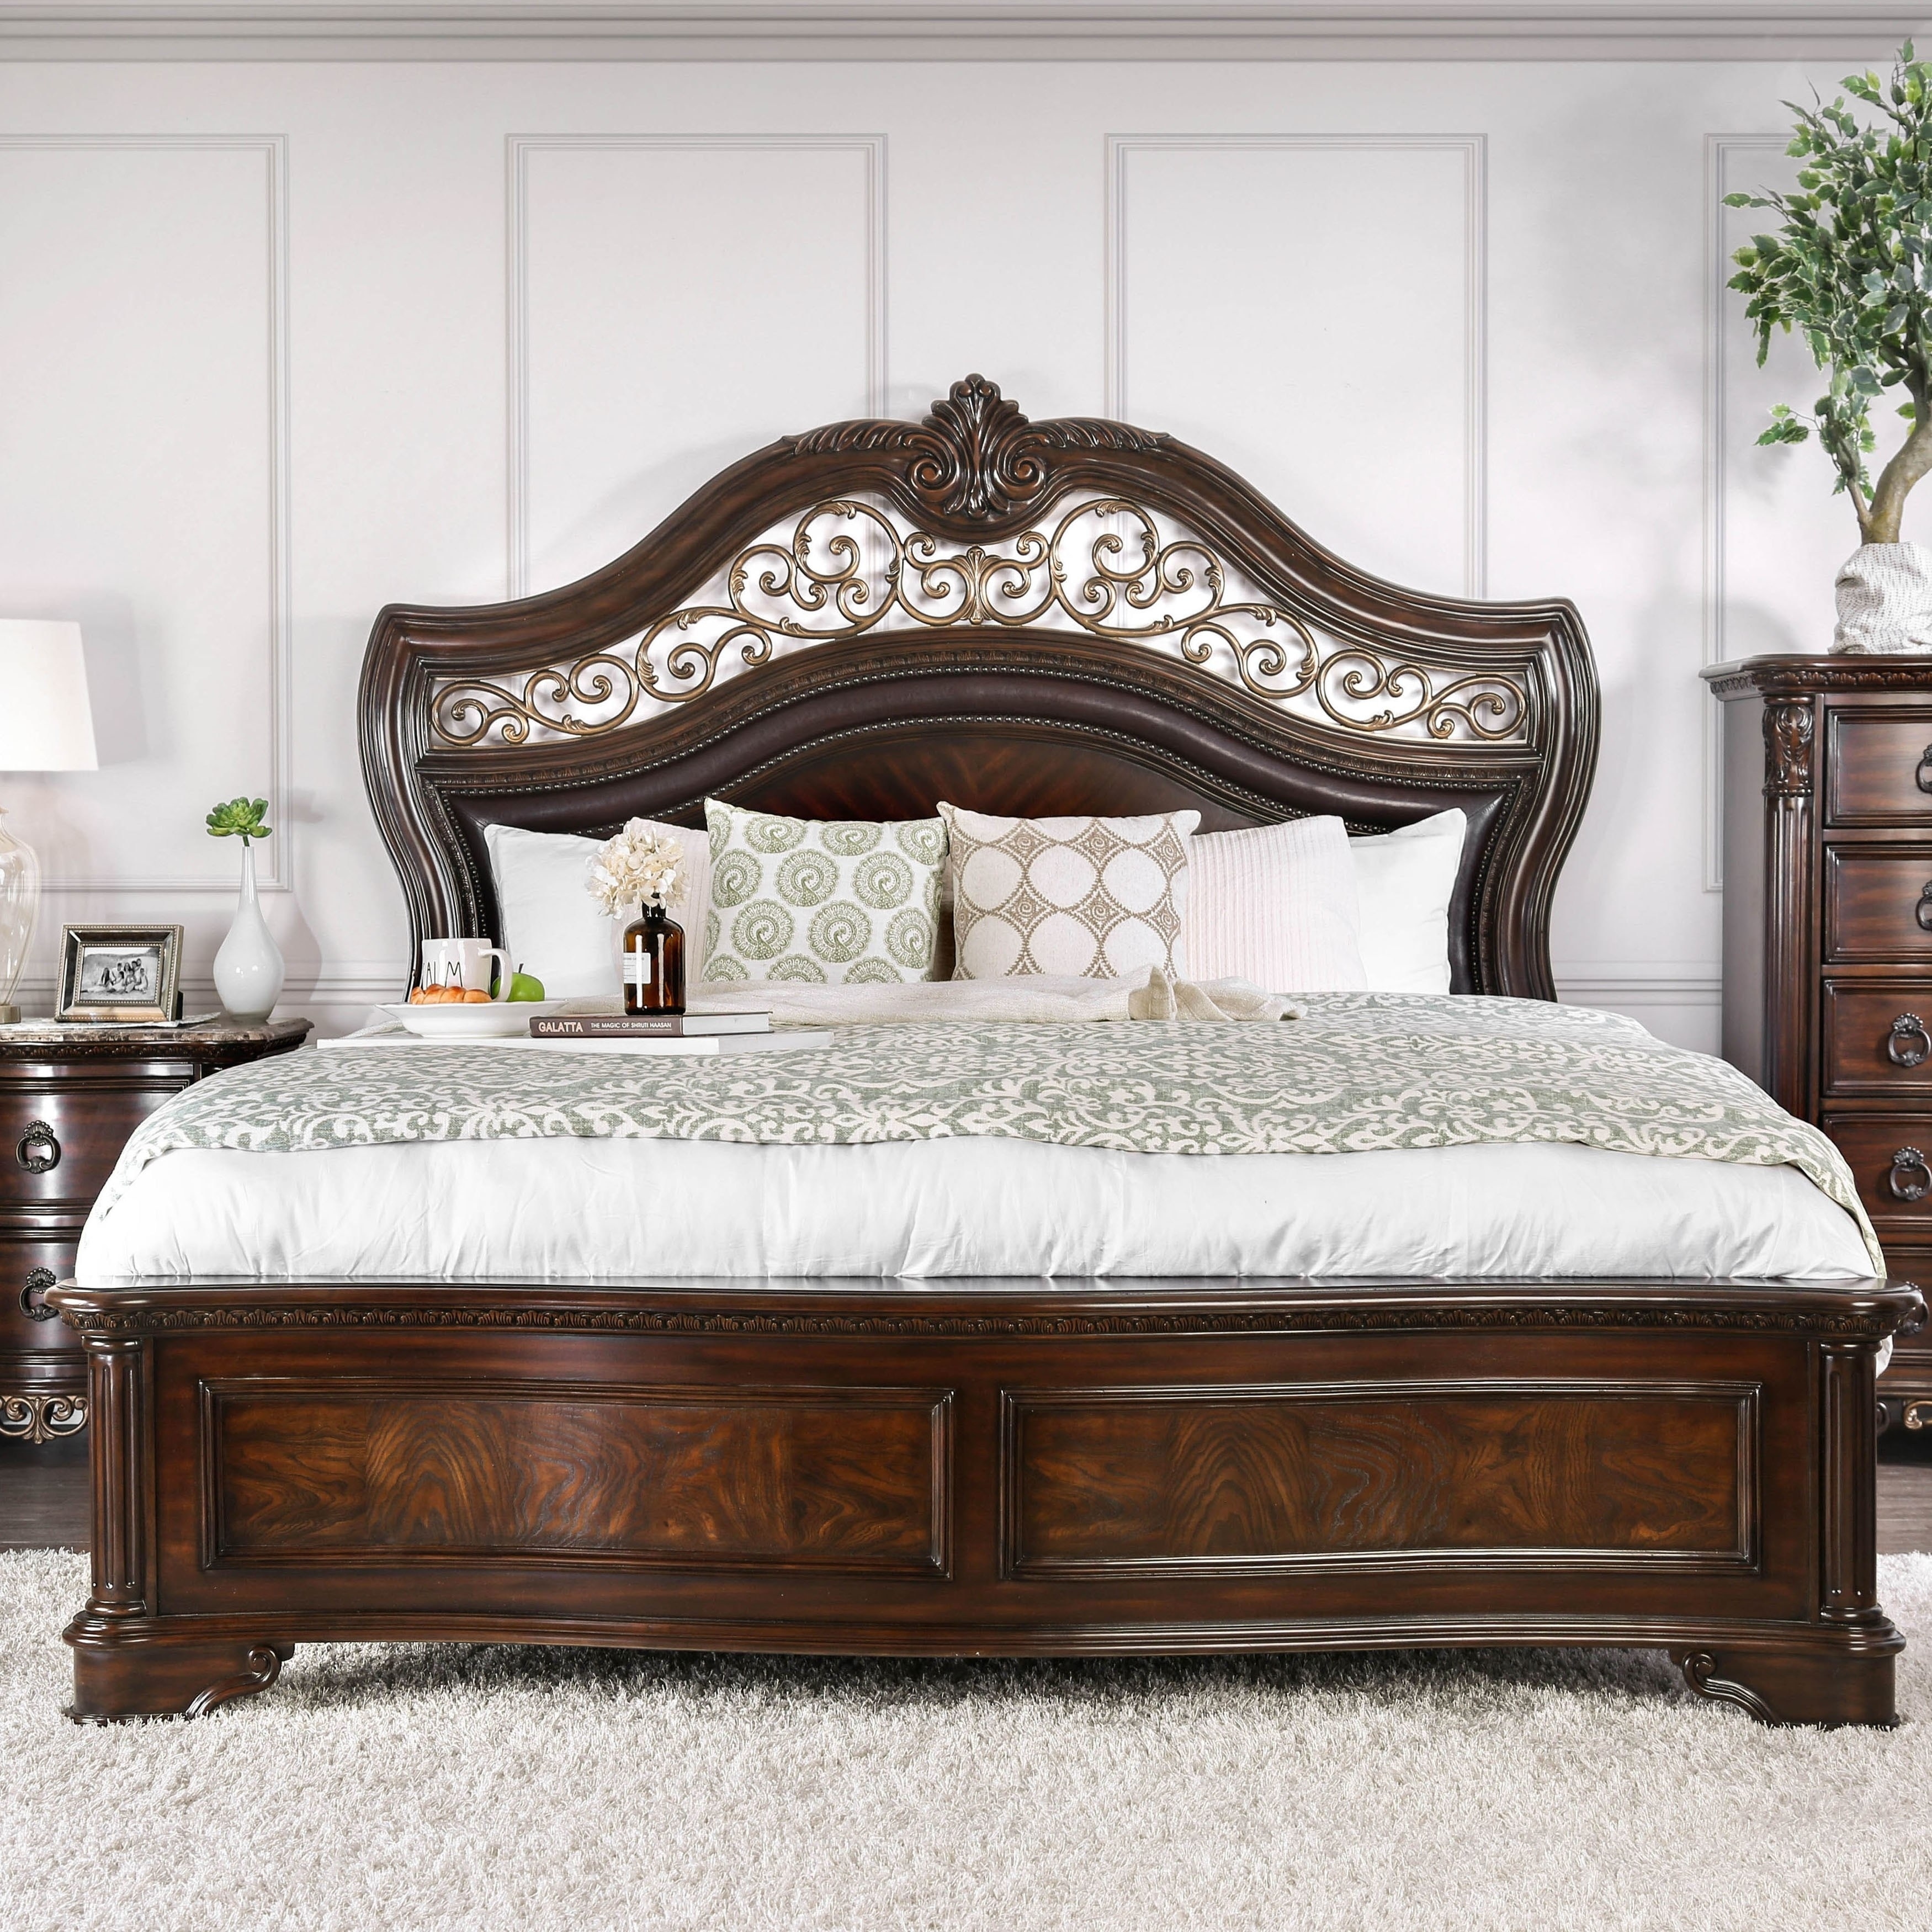 https://ak1.ostkcdn.com/images/products/21160098/Aiden-Traditional-Brown-Cherry-Carved-Panel-Bed-by-FOA-bd3fffd4-d70f-4856-b60f-ae3fdd14f9fc.jpg